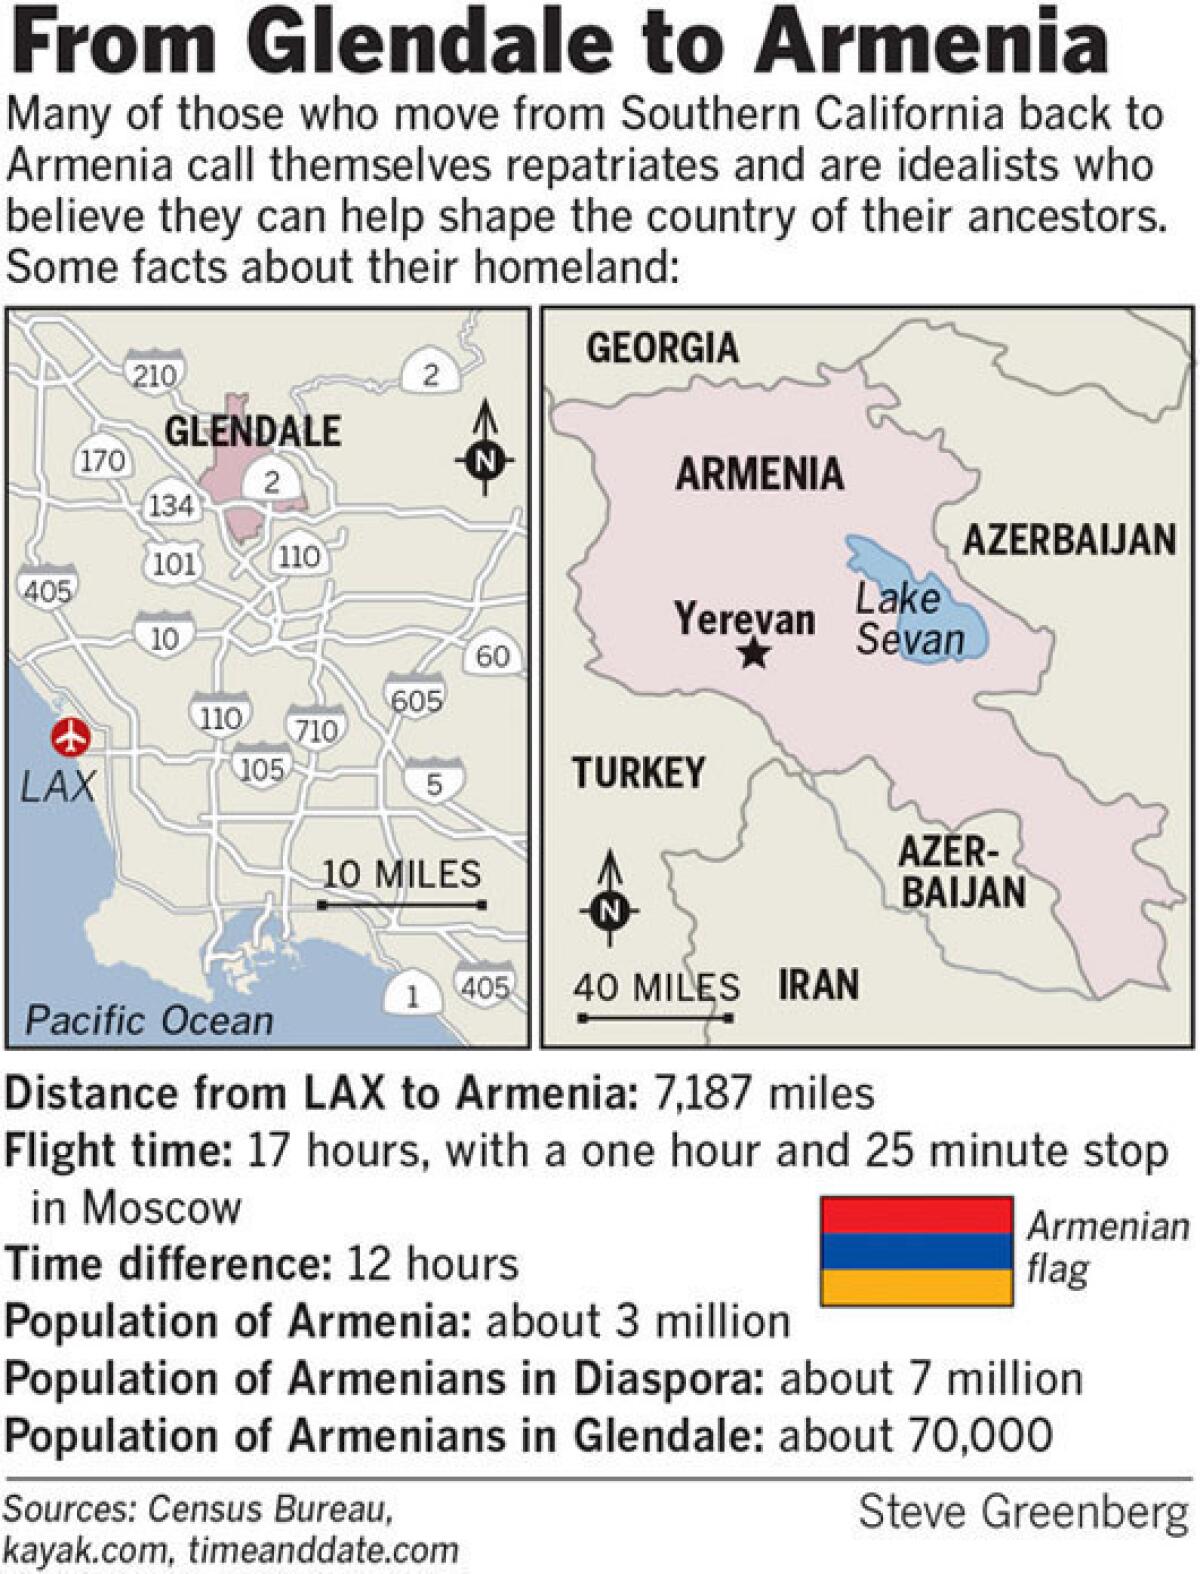 Many who move from Southern California back to Armenia call themselves repatriates and believe they can help shape the country of their ancestors.